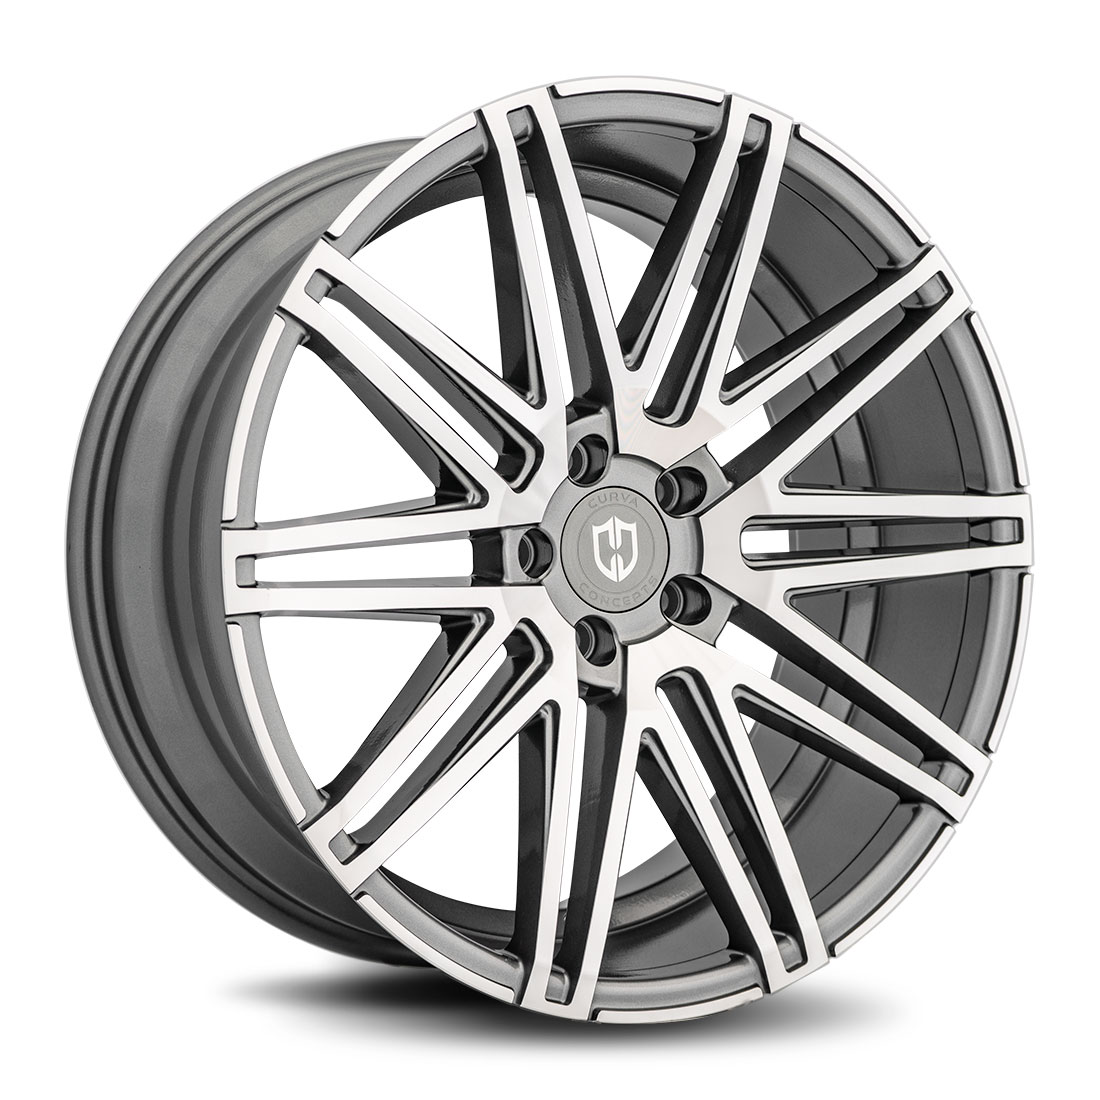 Curva Concepts C48 Gunmetal Machined Face Aftermarket Wheels